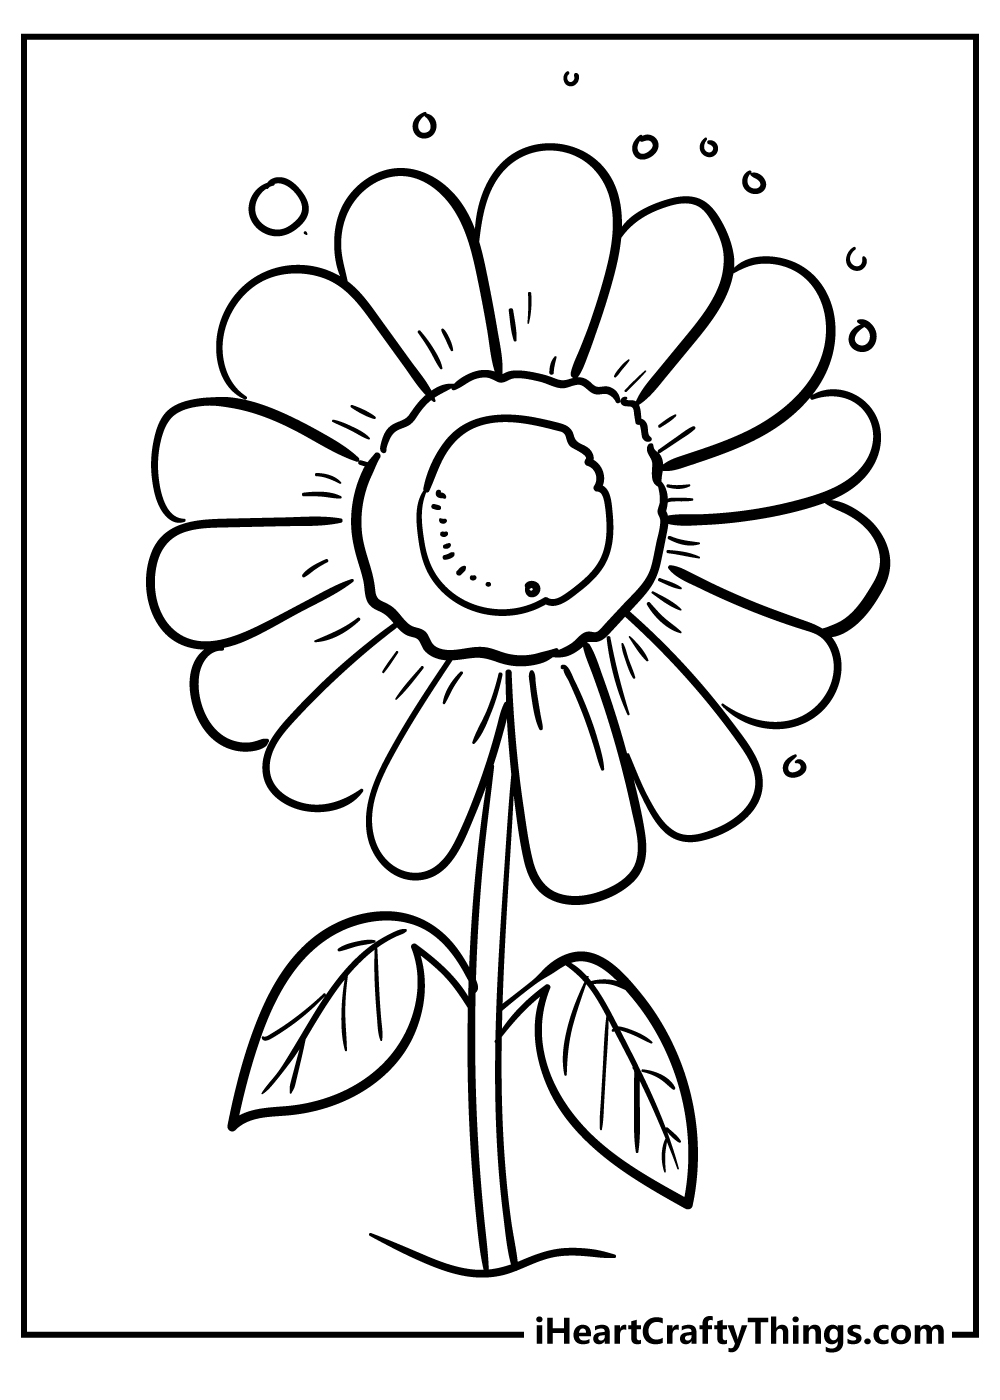 Daisy Coloring Pages for adults free printable